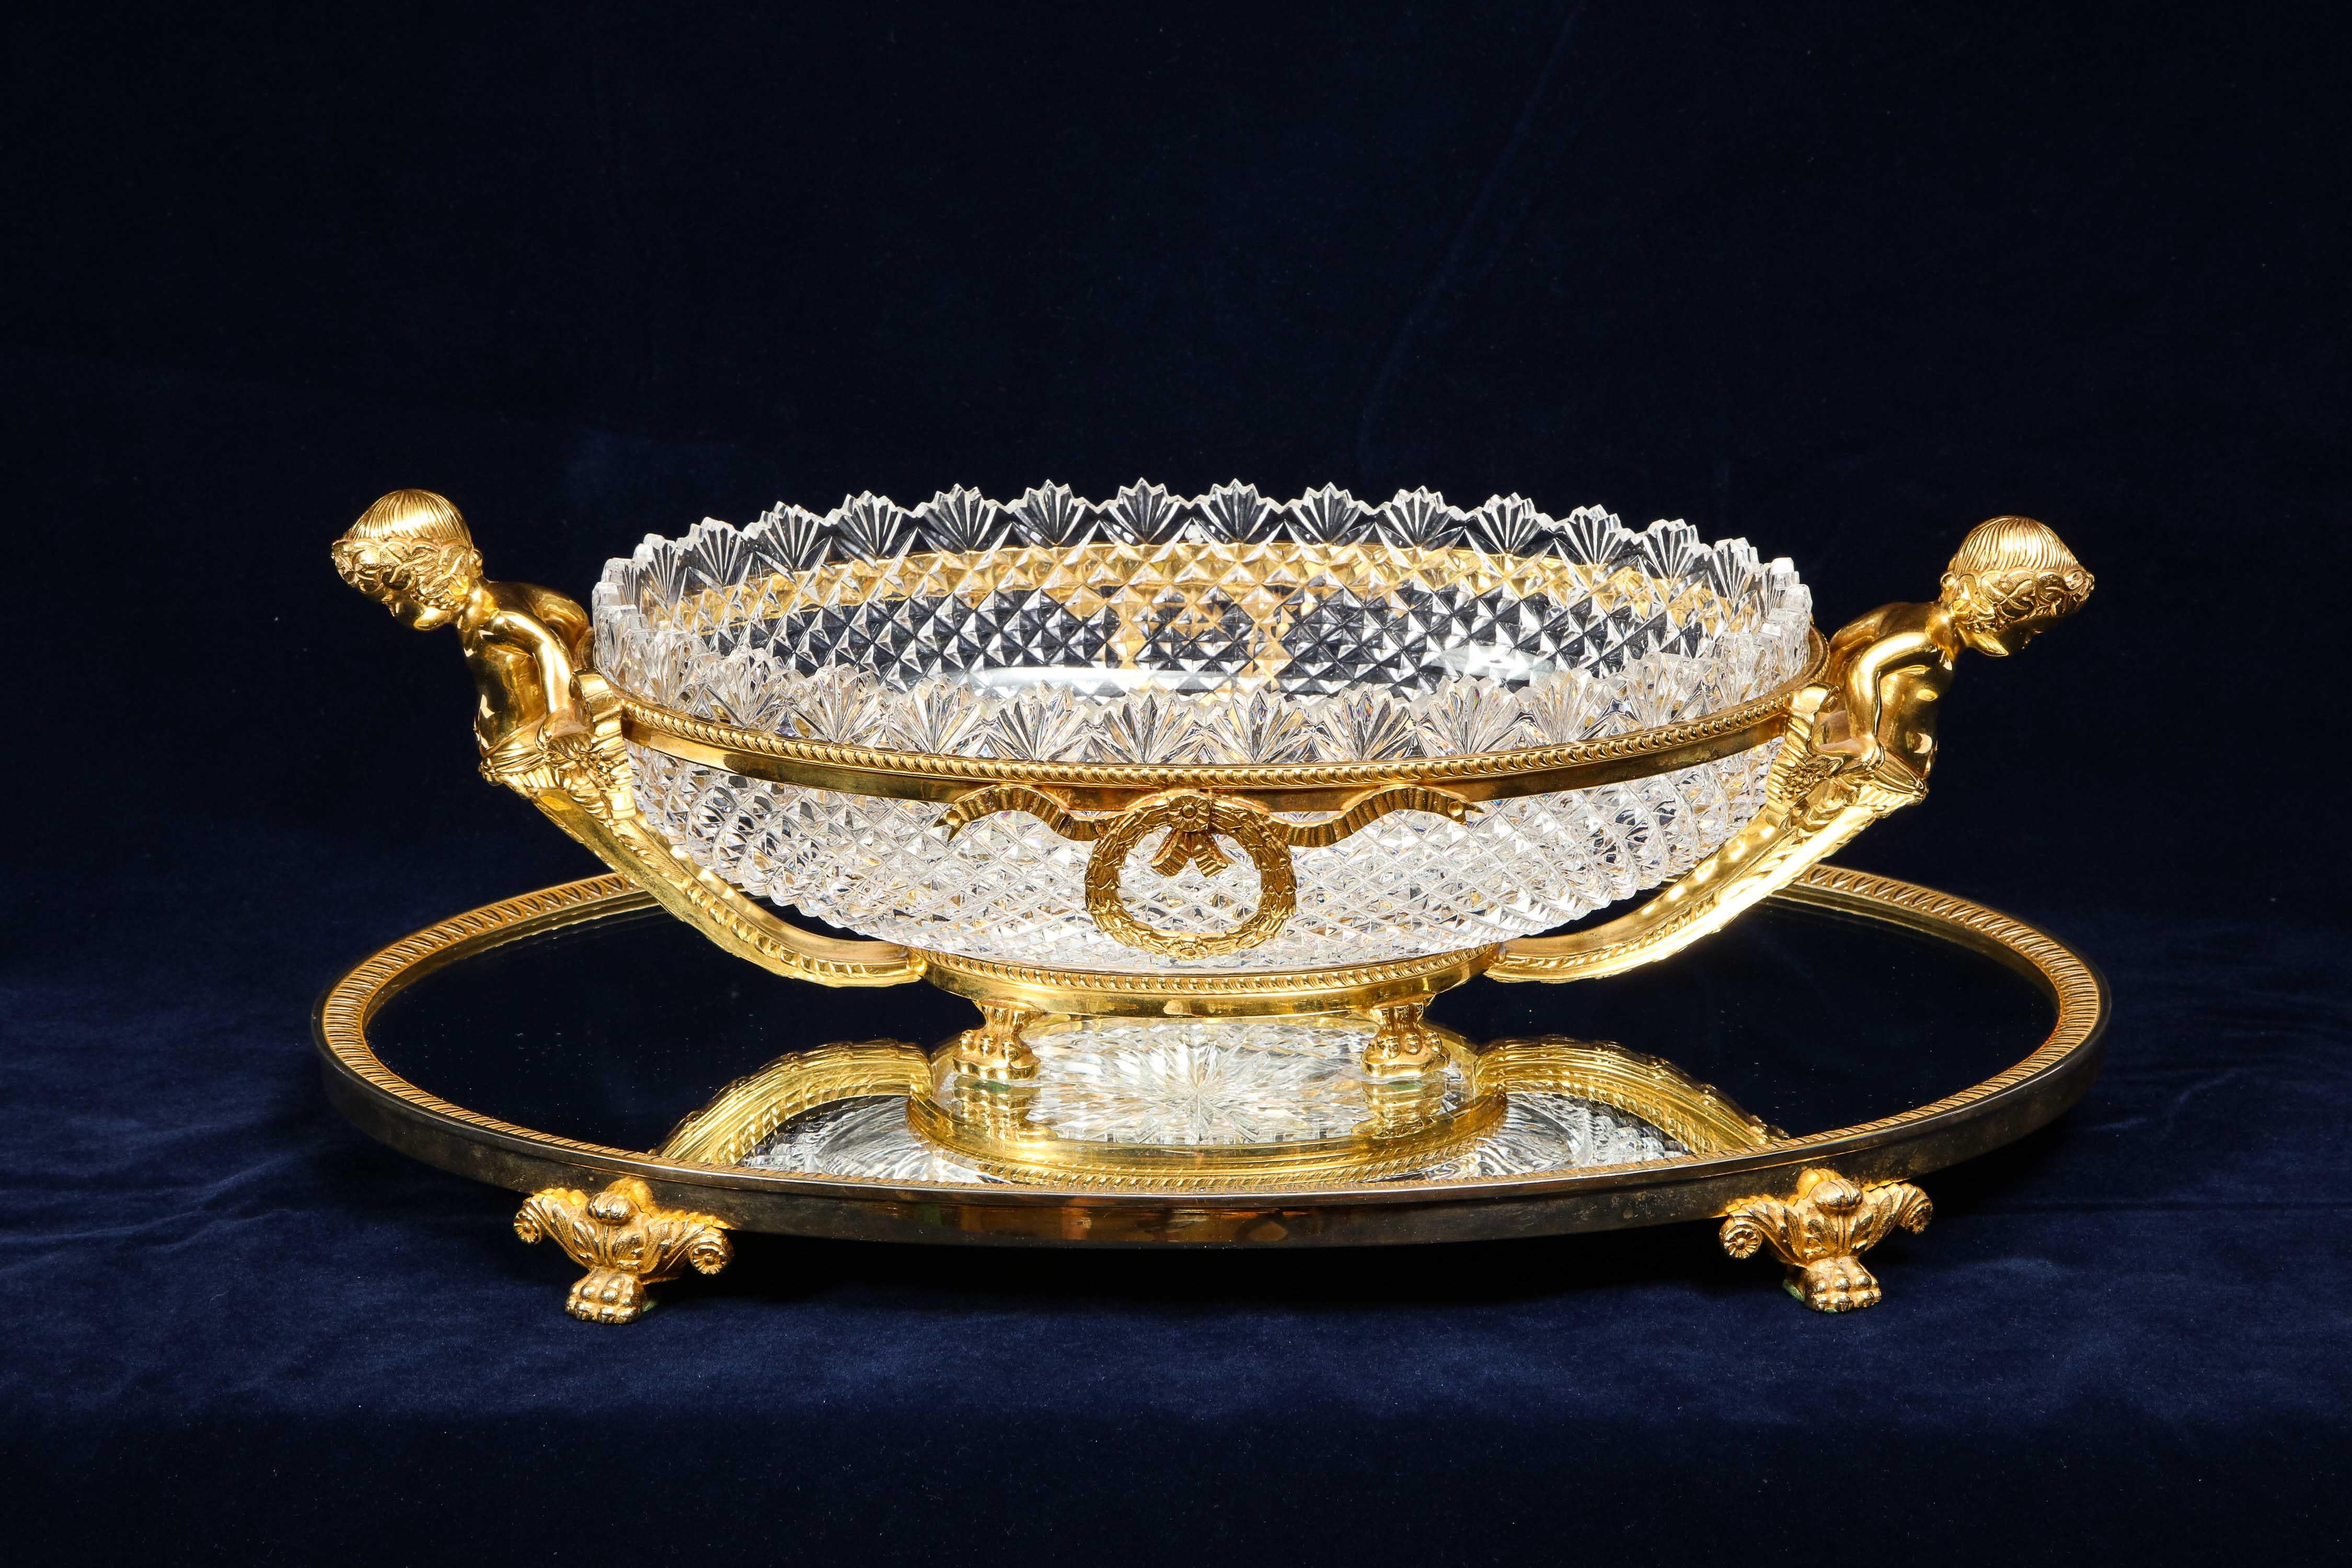 A beautiful antique French Louis XVI style 19th century gilt bronze mounted hand diamond cut Baccarat (Attributed) crystal centerpiece on a gilt bronze mounted mirrored plateau. The crystal is beautifully hand-diamond cut with an impressive quilted